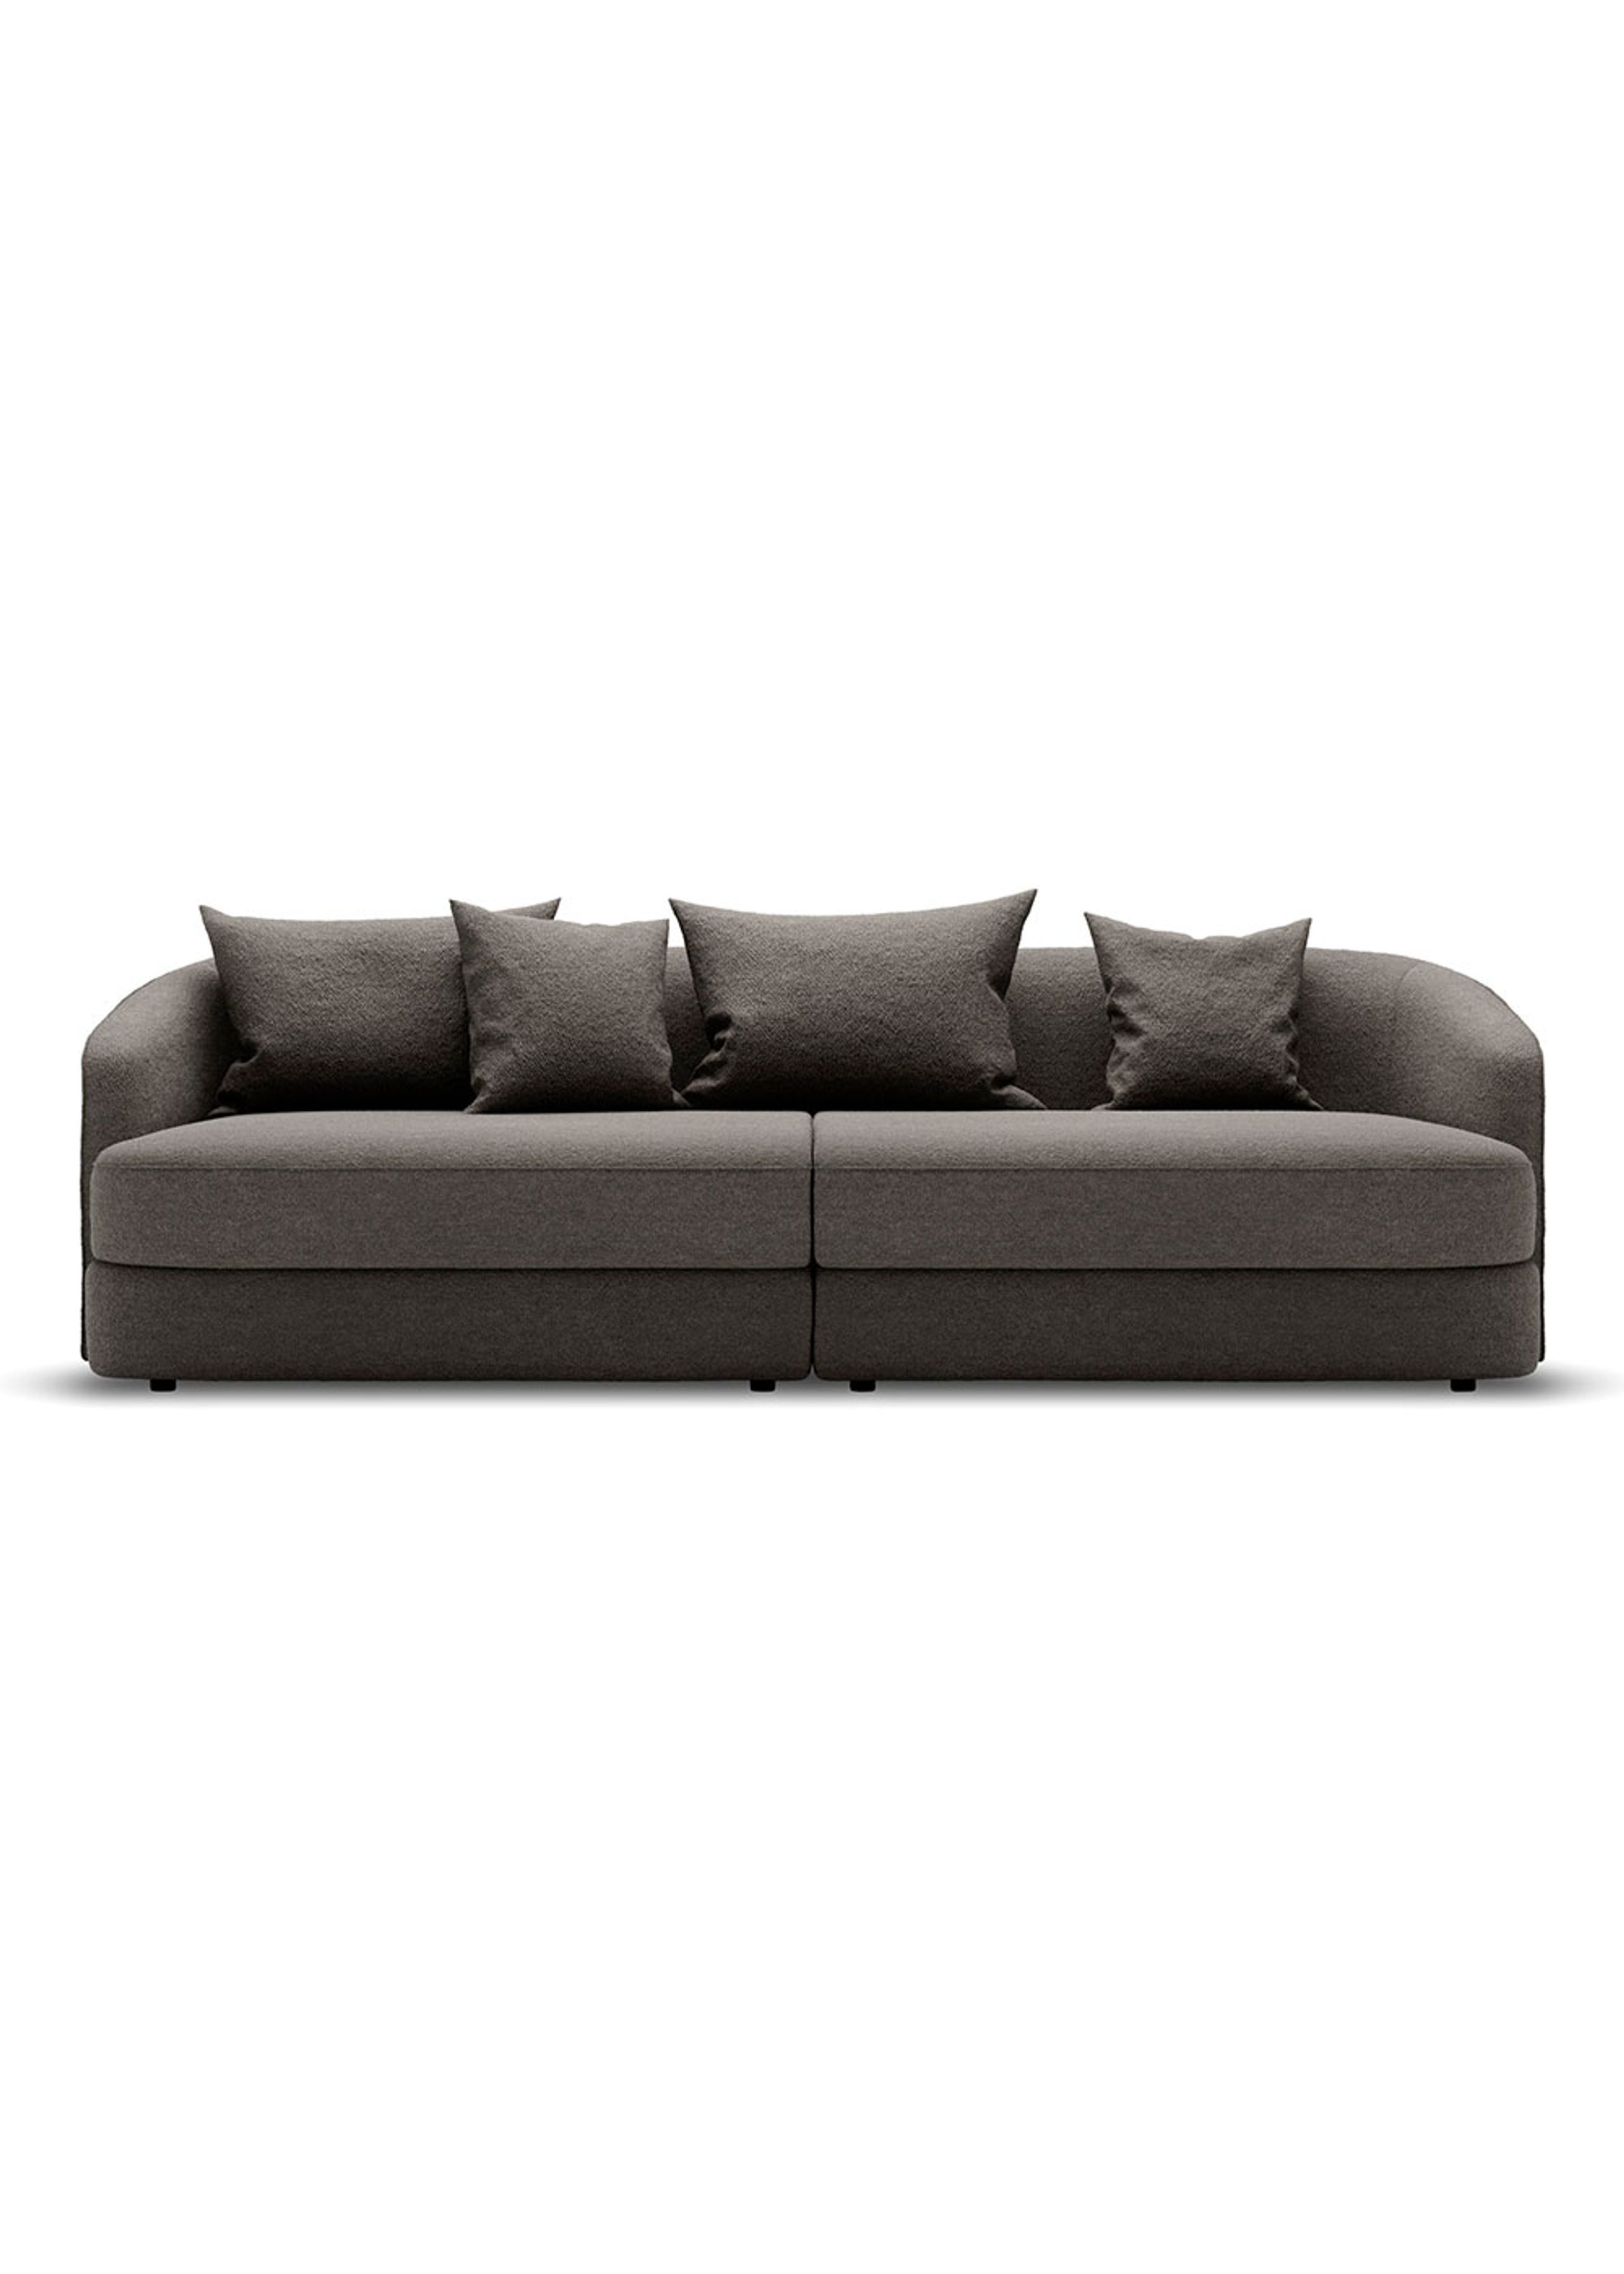 New Works - Canapé lounge - Covent Residential Sofa - Nevotex Barnum Dark Taupe 10